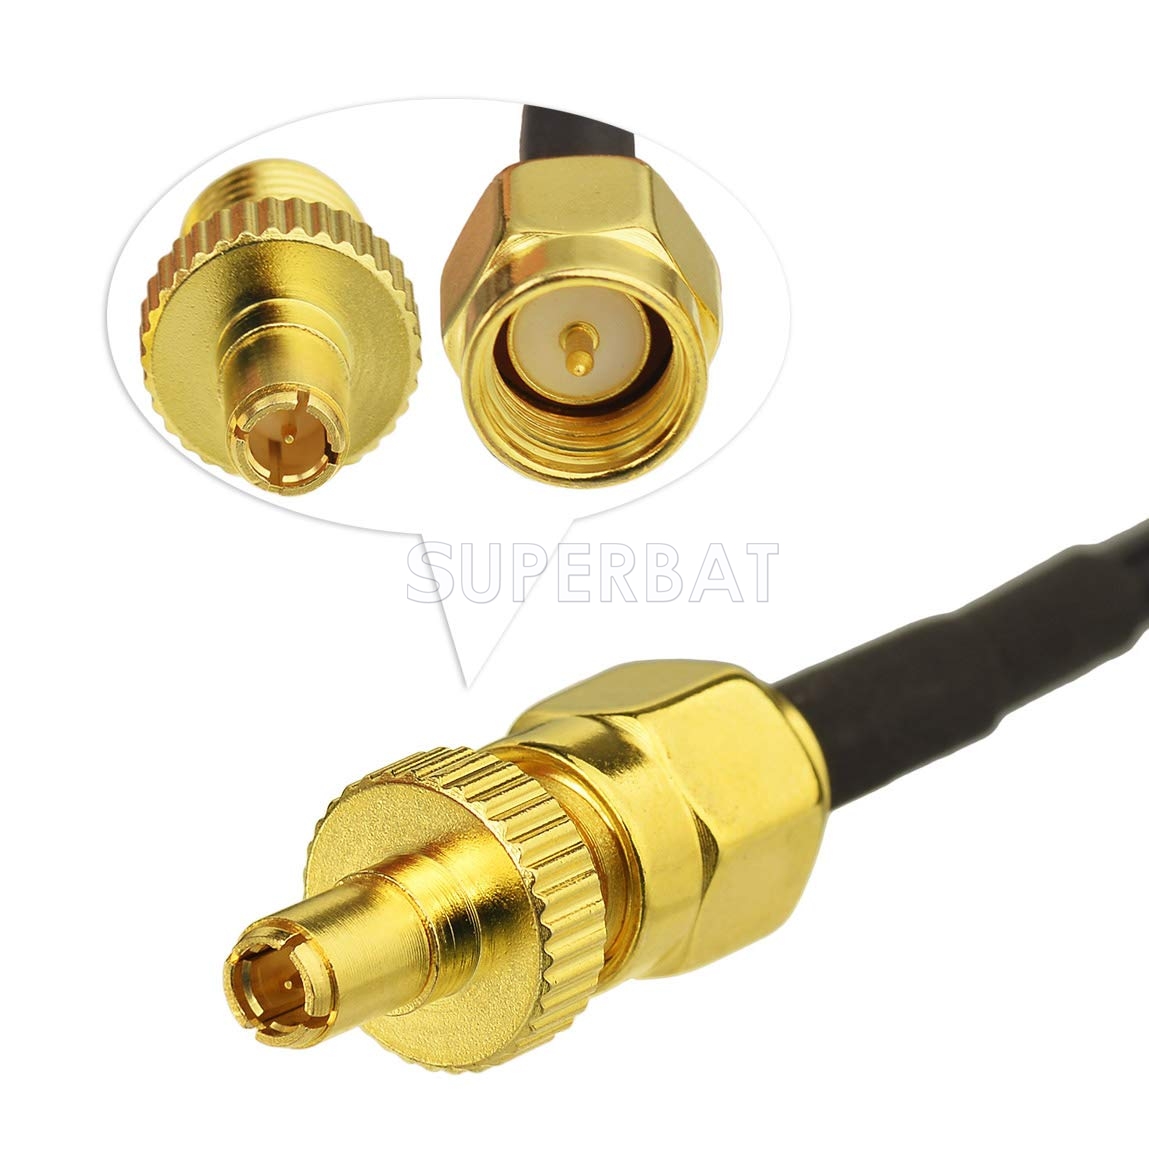 7dBi 4G LTE Magnetic Base SMA Male Antenna for 4G LTE Router Huawei E968 B932 